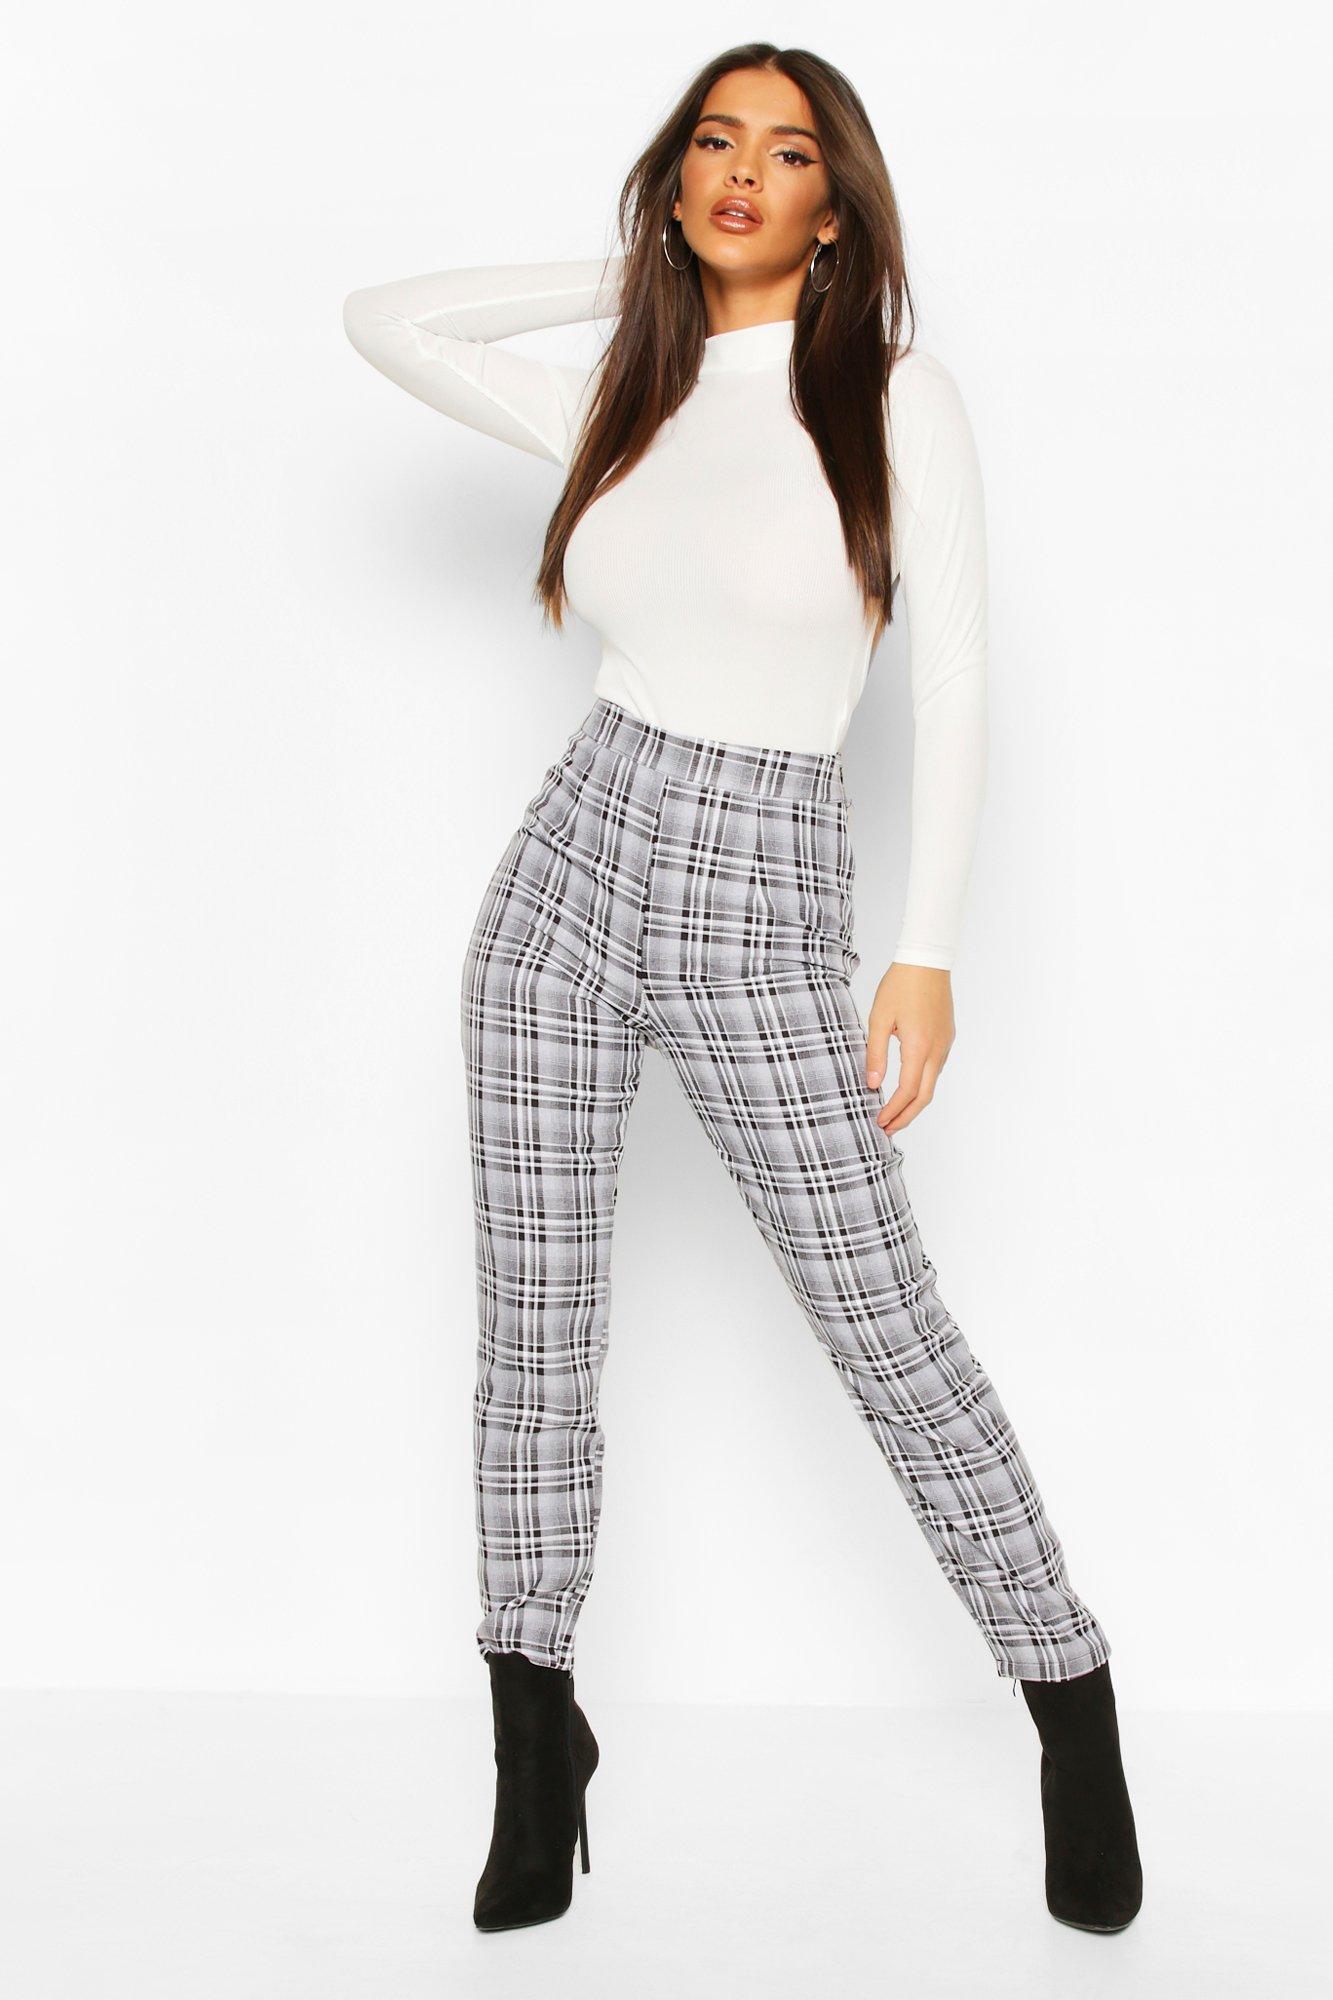 grey check ankle grazer trousers